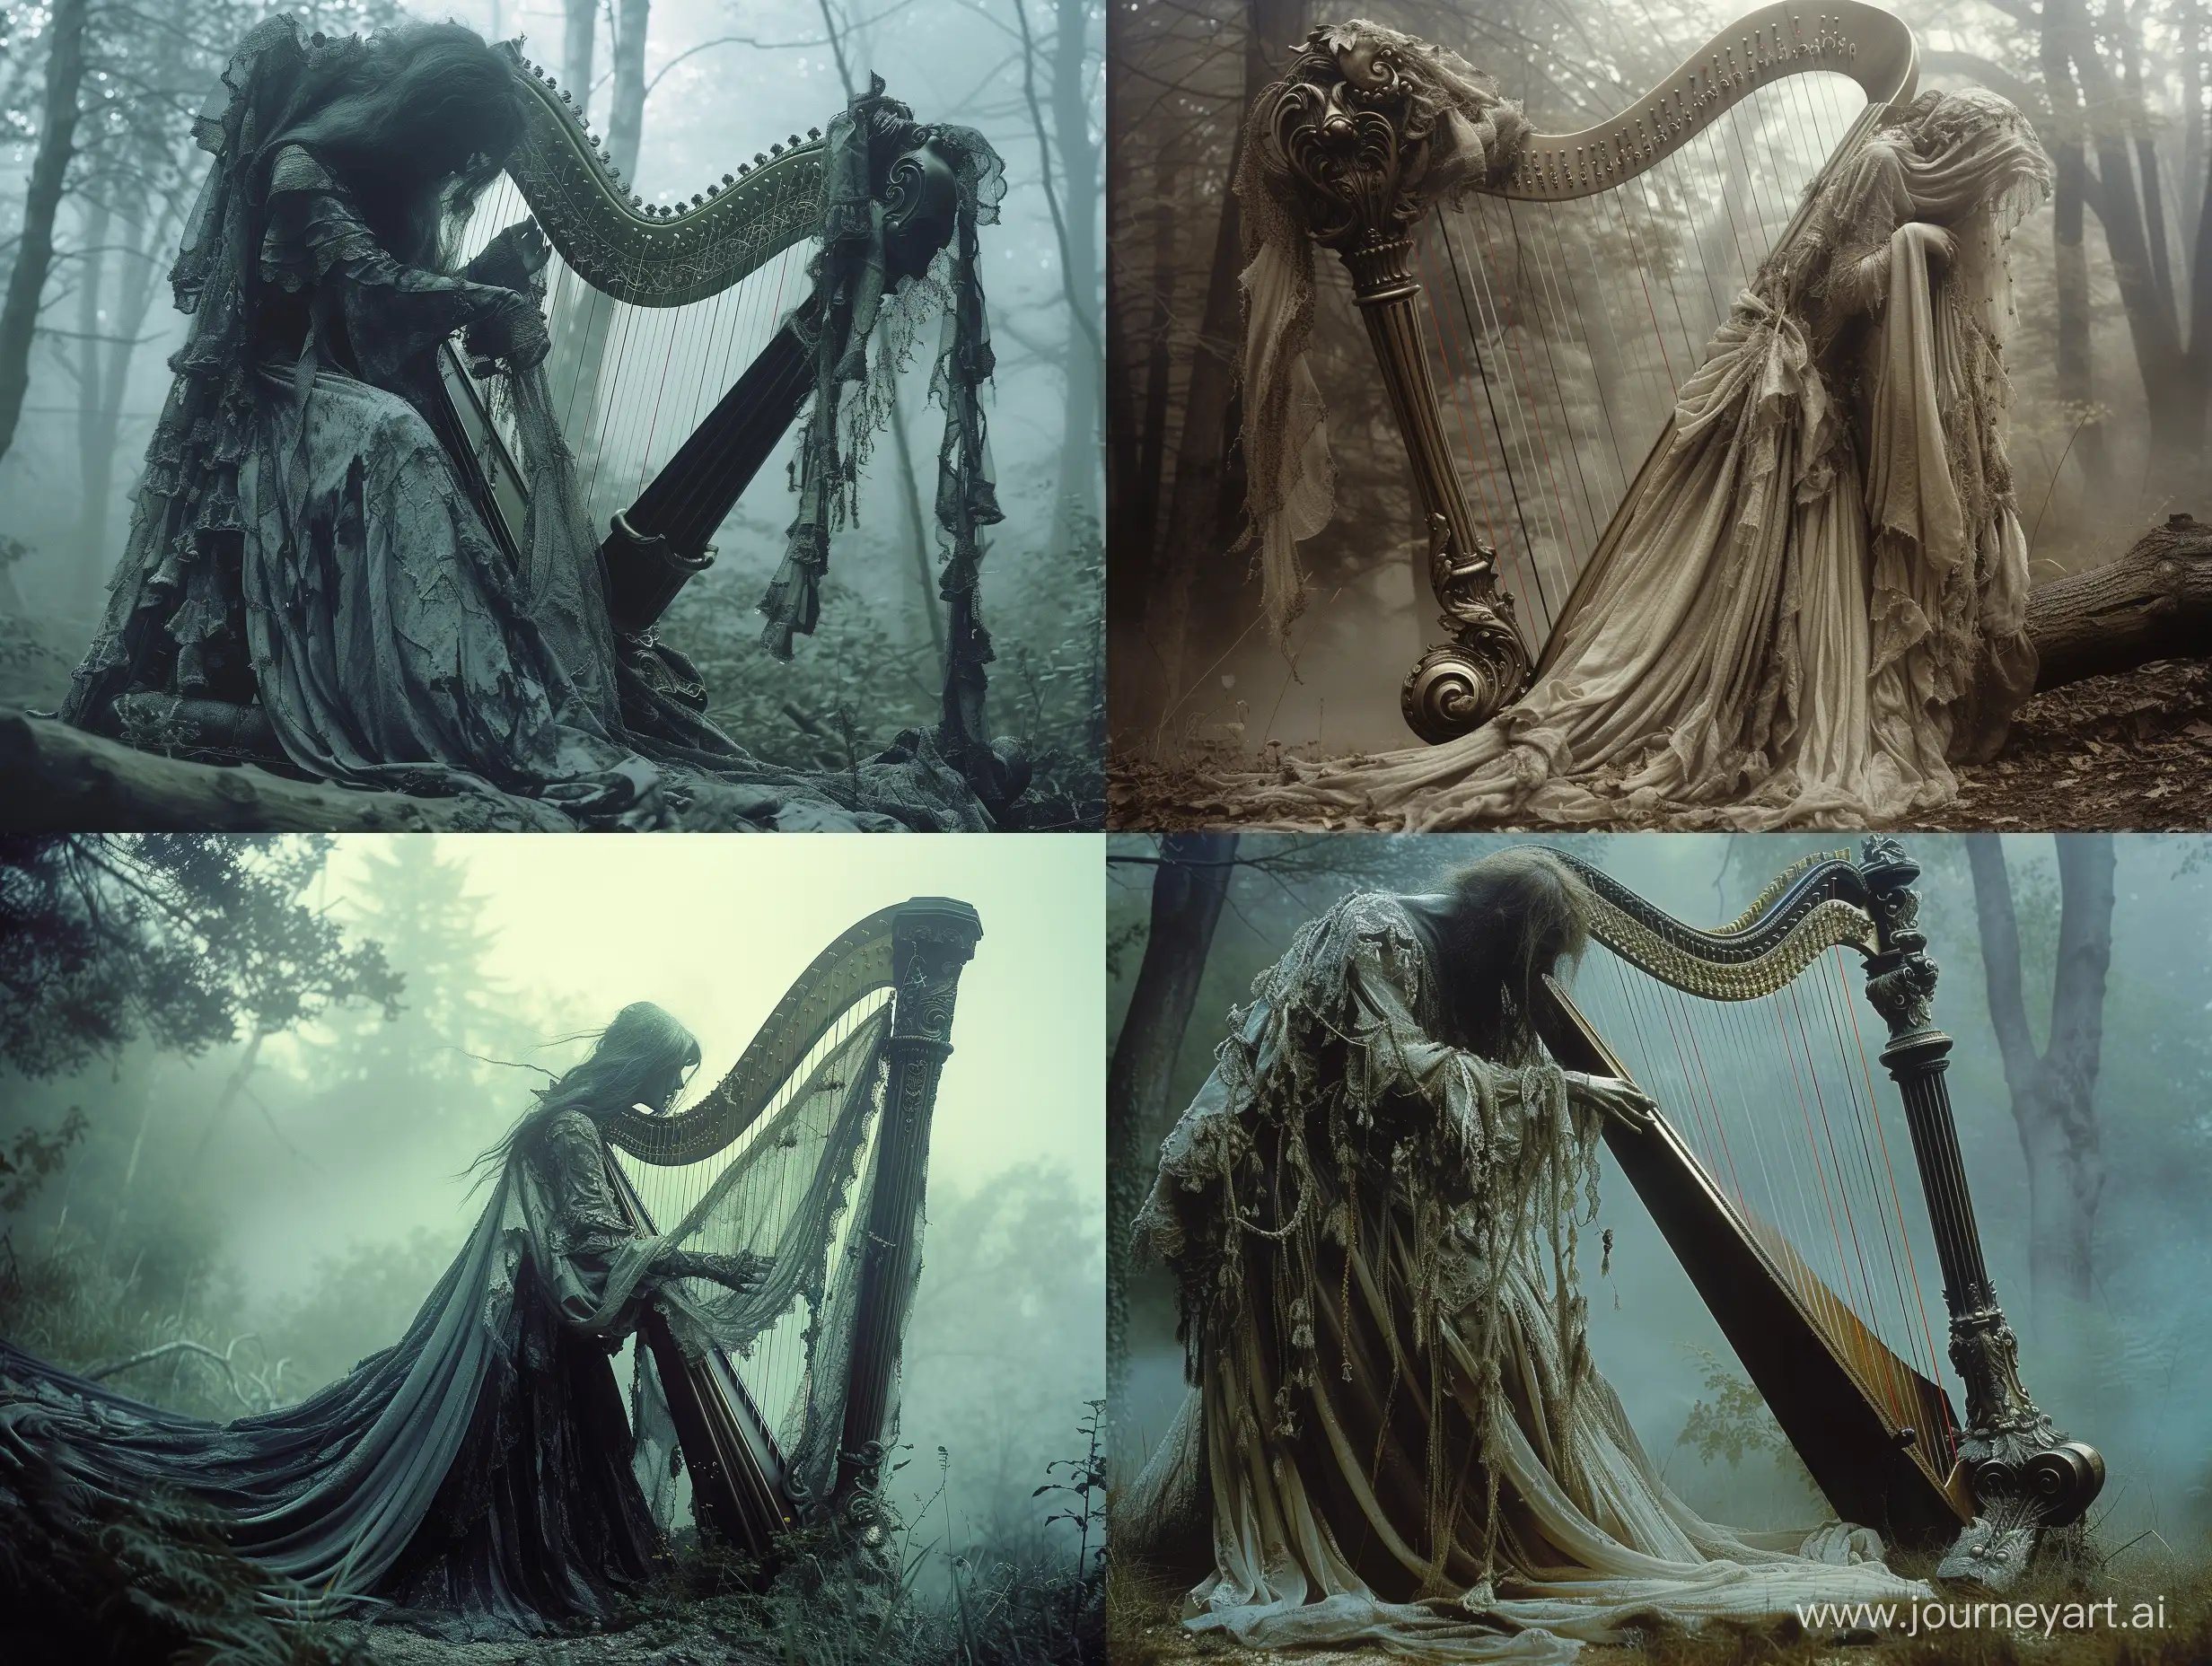 Ephemeral, ghostly apparitions of a beautiful spectral woman, dressed in flowing, tattered garments playing a large ornately detailed harp in a creepy misty forest, attention to detail, taken on provia.